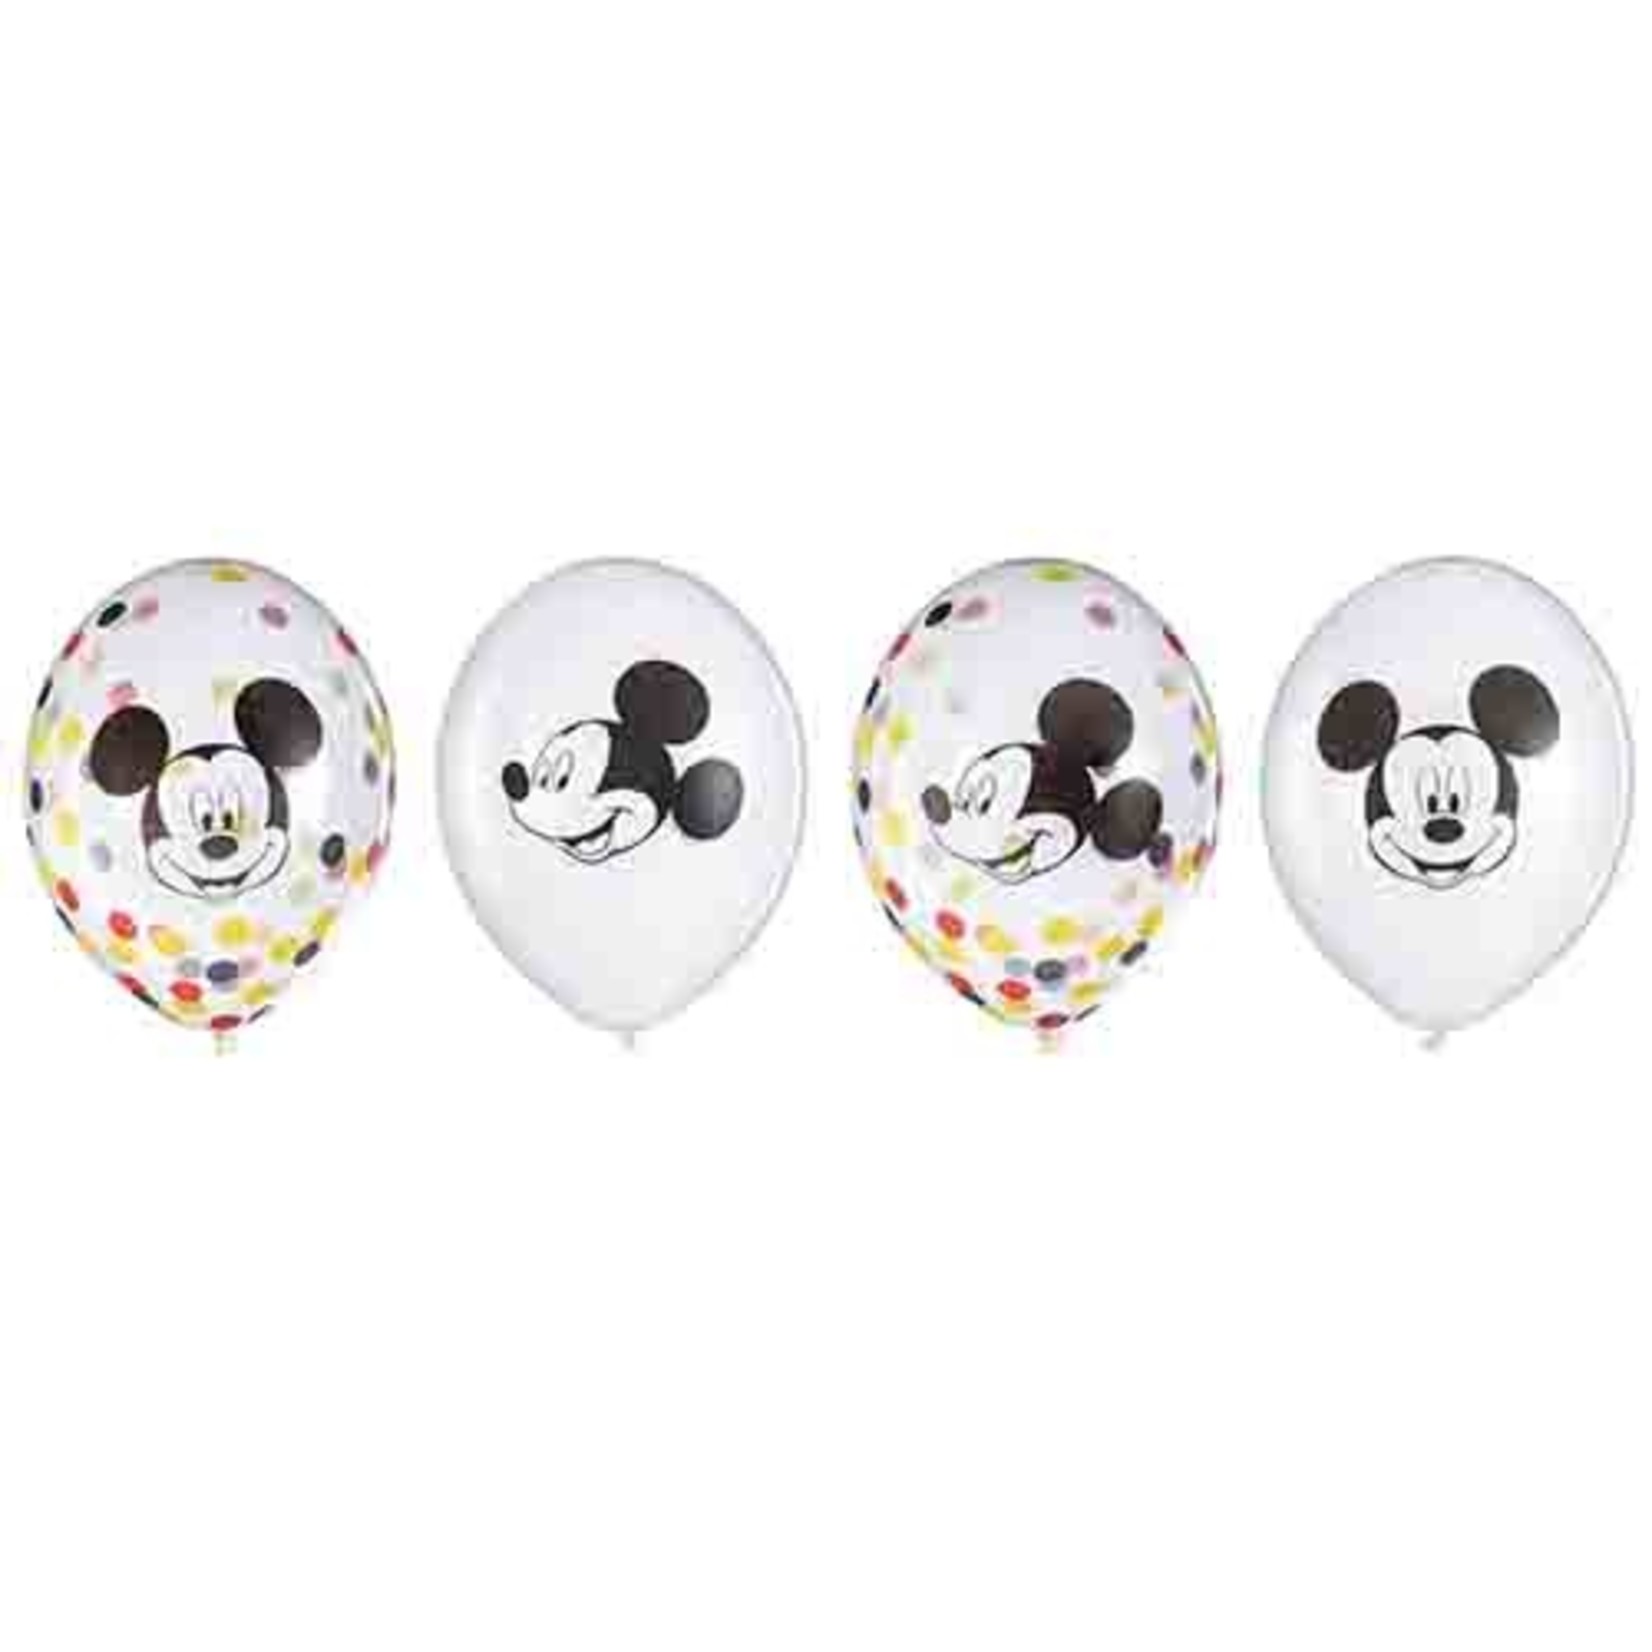 Amscan Mickey Mouse Latex Confetti Balloons - 6ct.